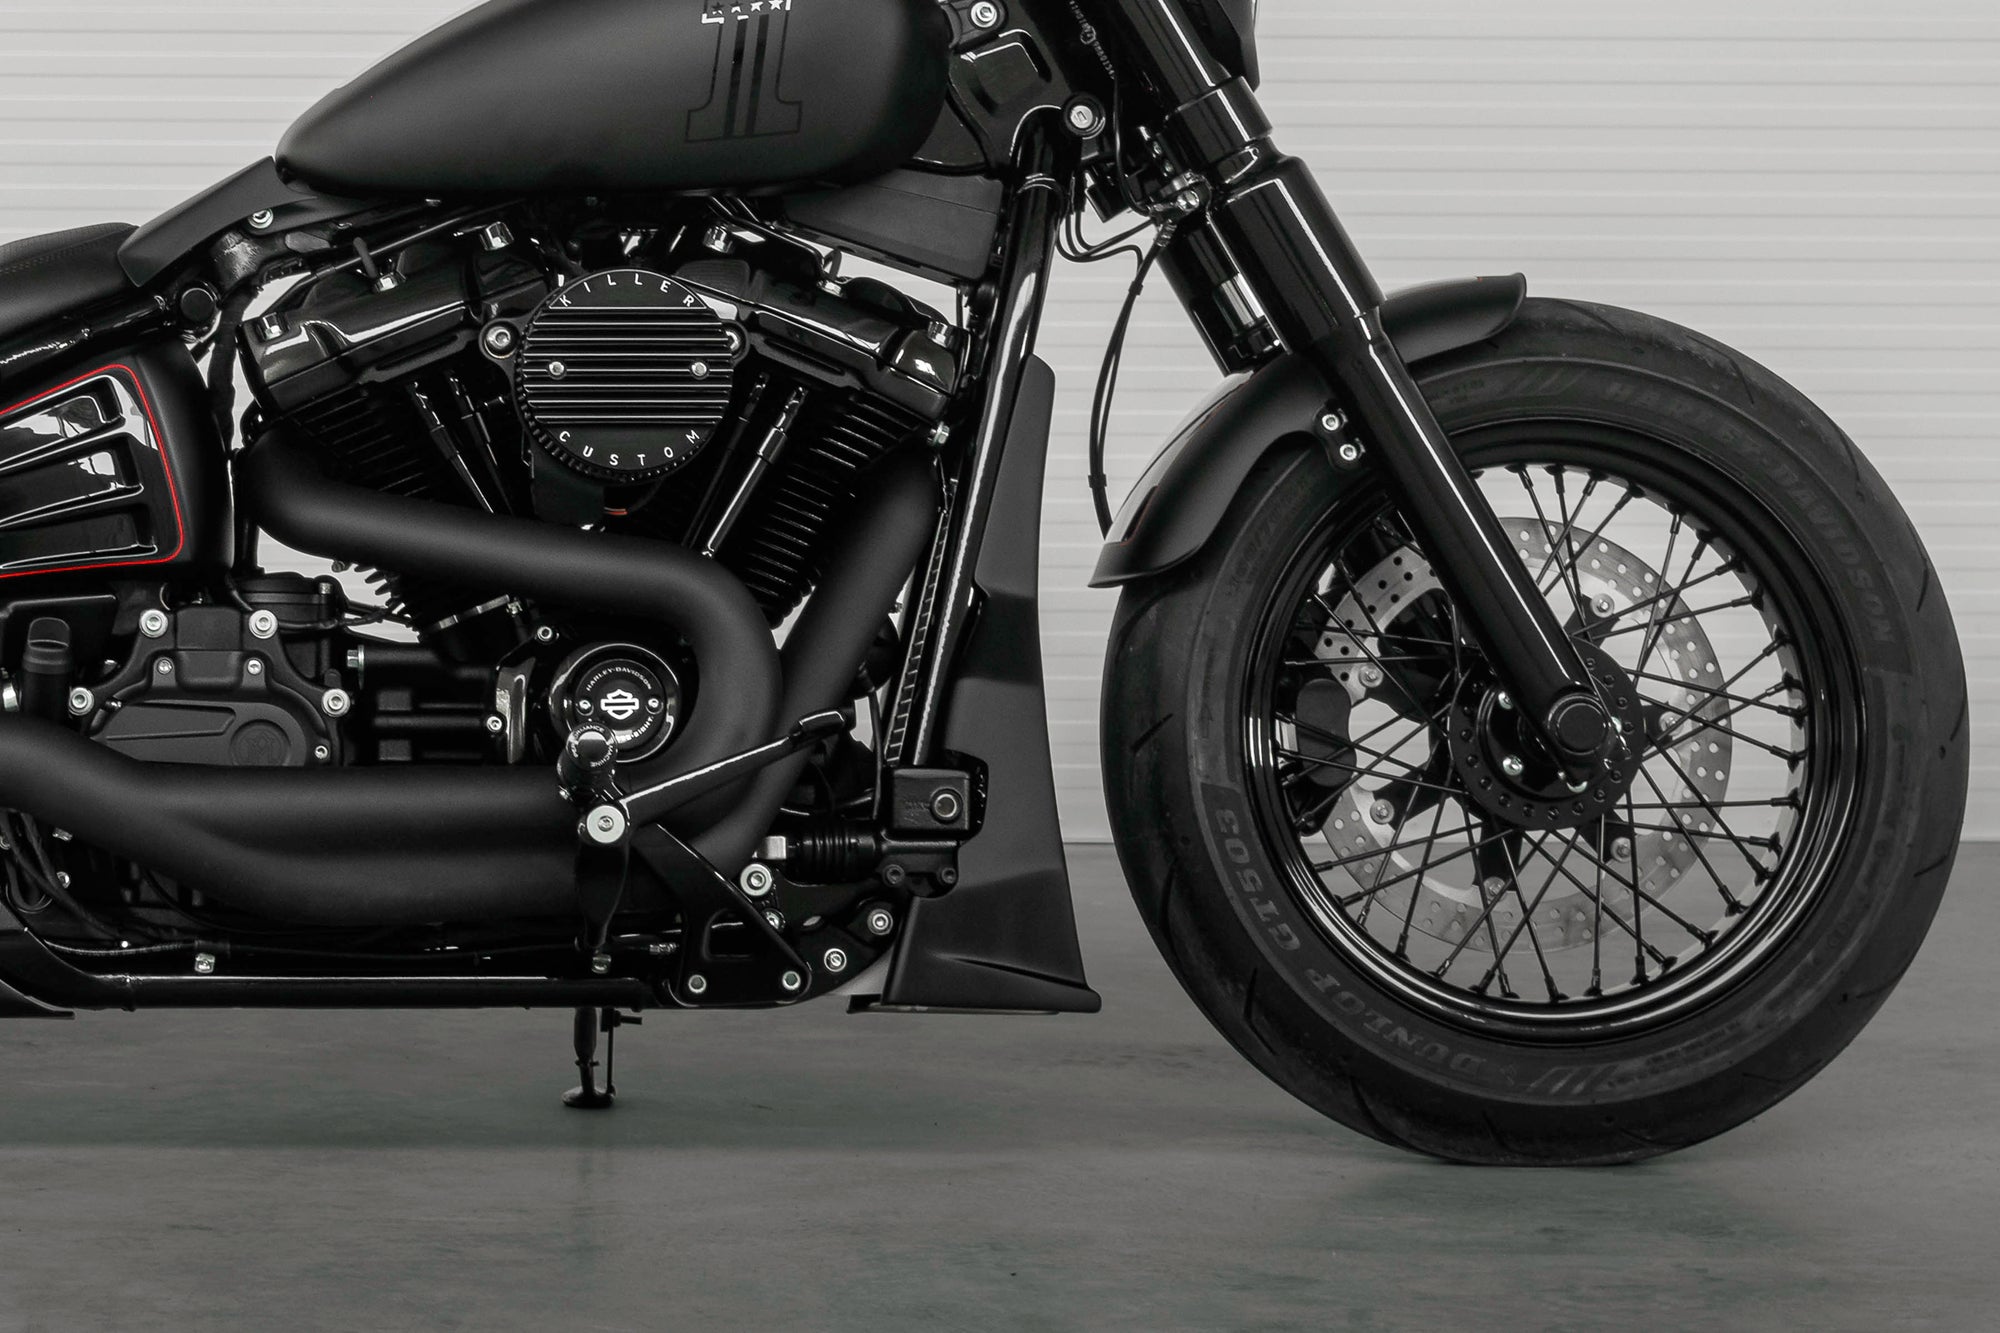 Zoomed Harley Davidson motorcycle with Killer Custom parts from the side in a modern white garage